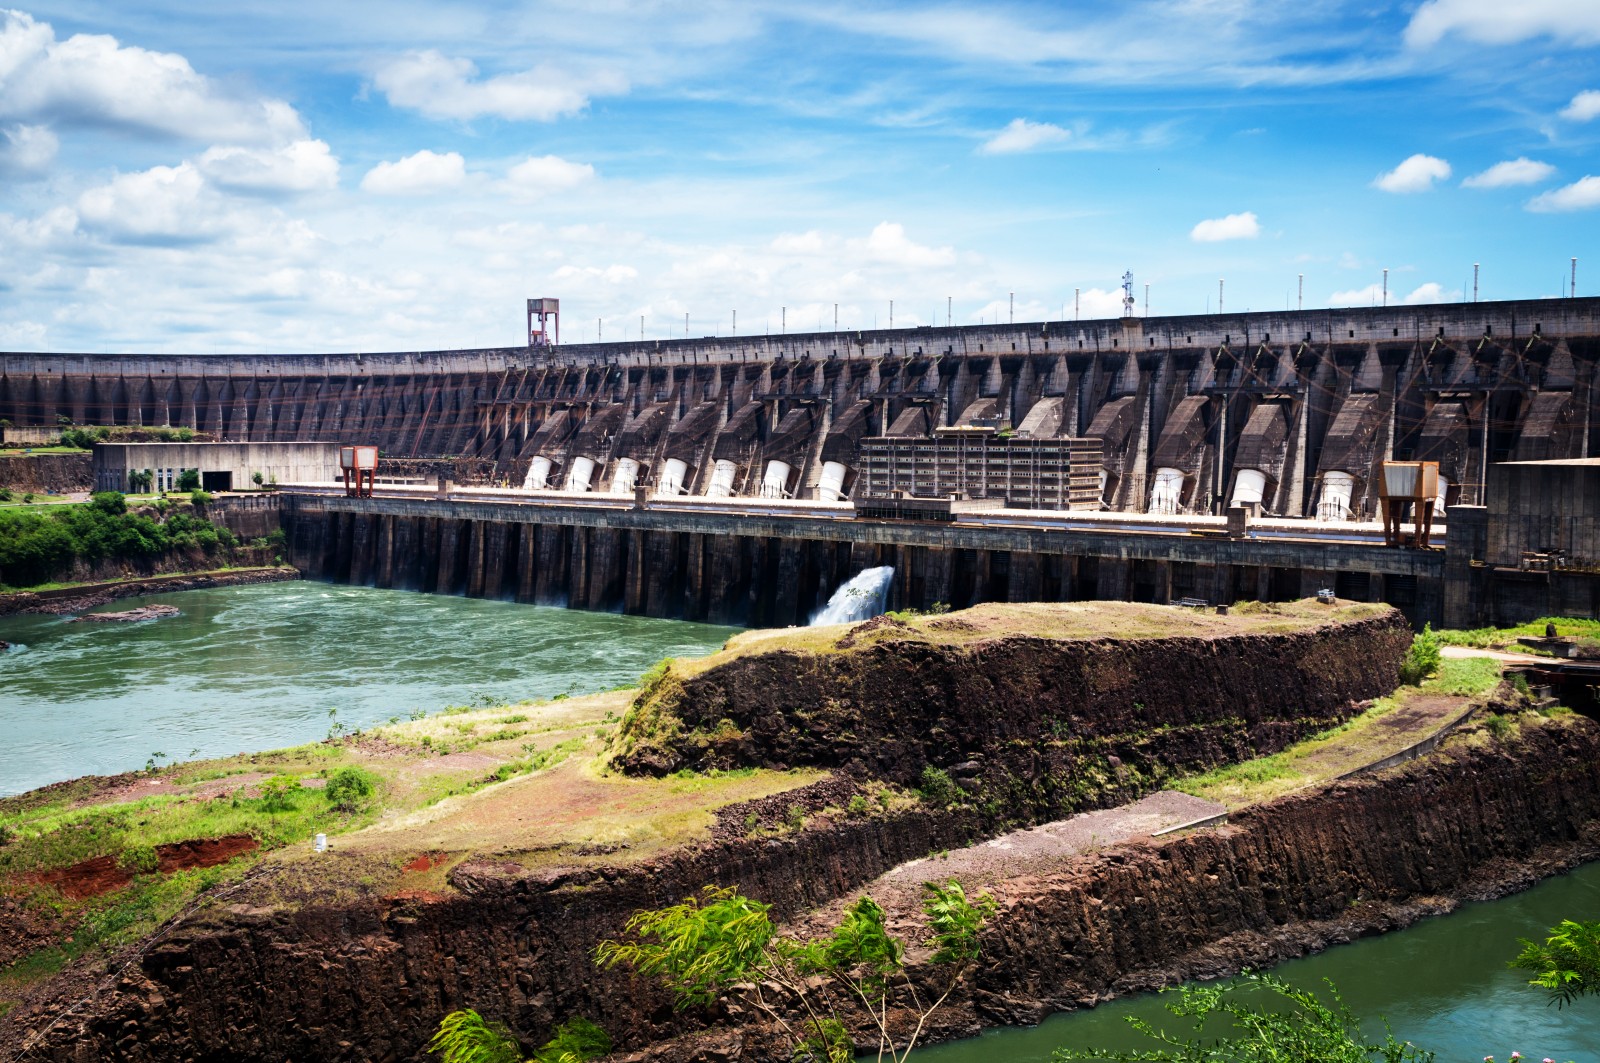 Hydropower provides more than three-quarters of Brazil's electricity. Recent droughts have called into question the reliability and economic performance of such dams. Photo courtesy Deni Williams via Flickr Creative Commons